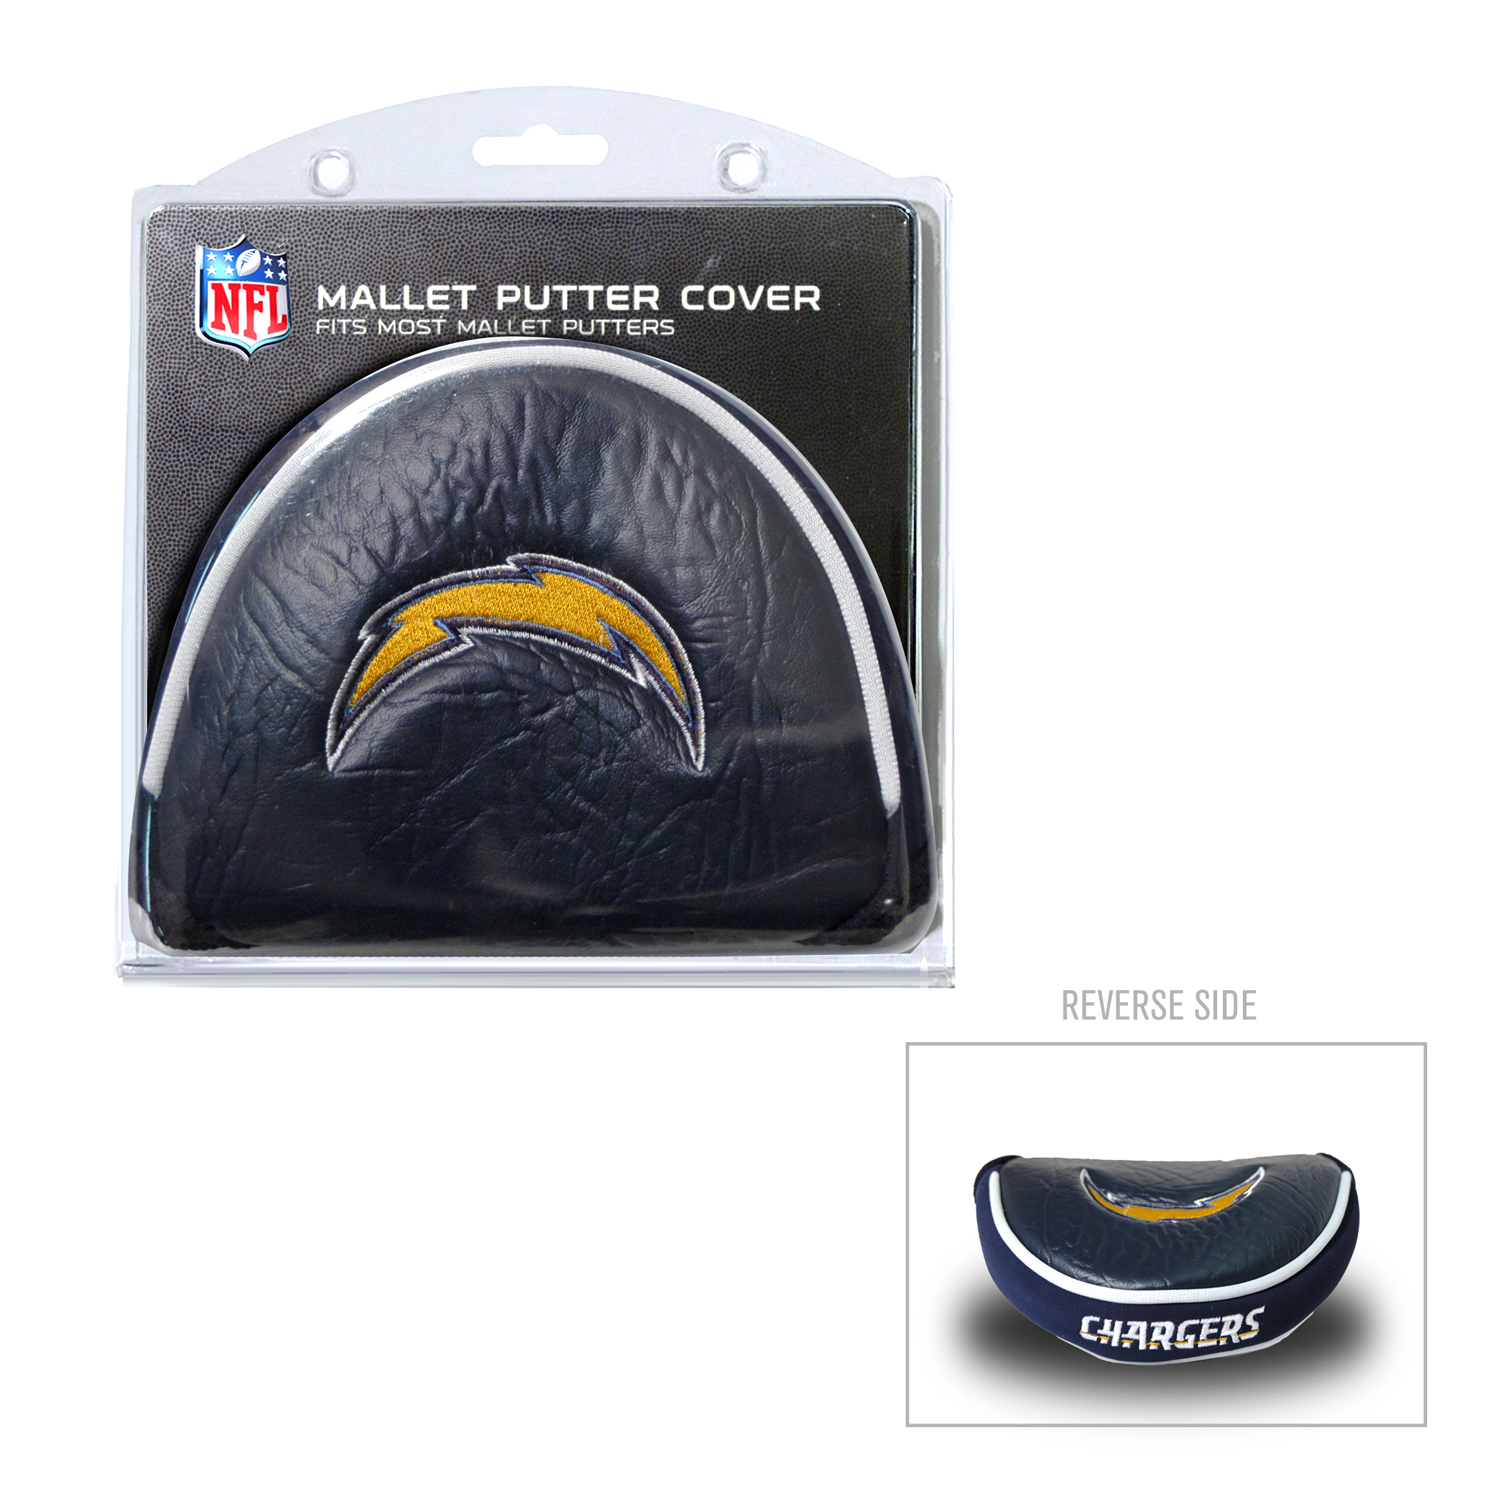 San Diego Chargers Mallet Putter Cover